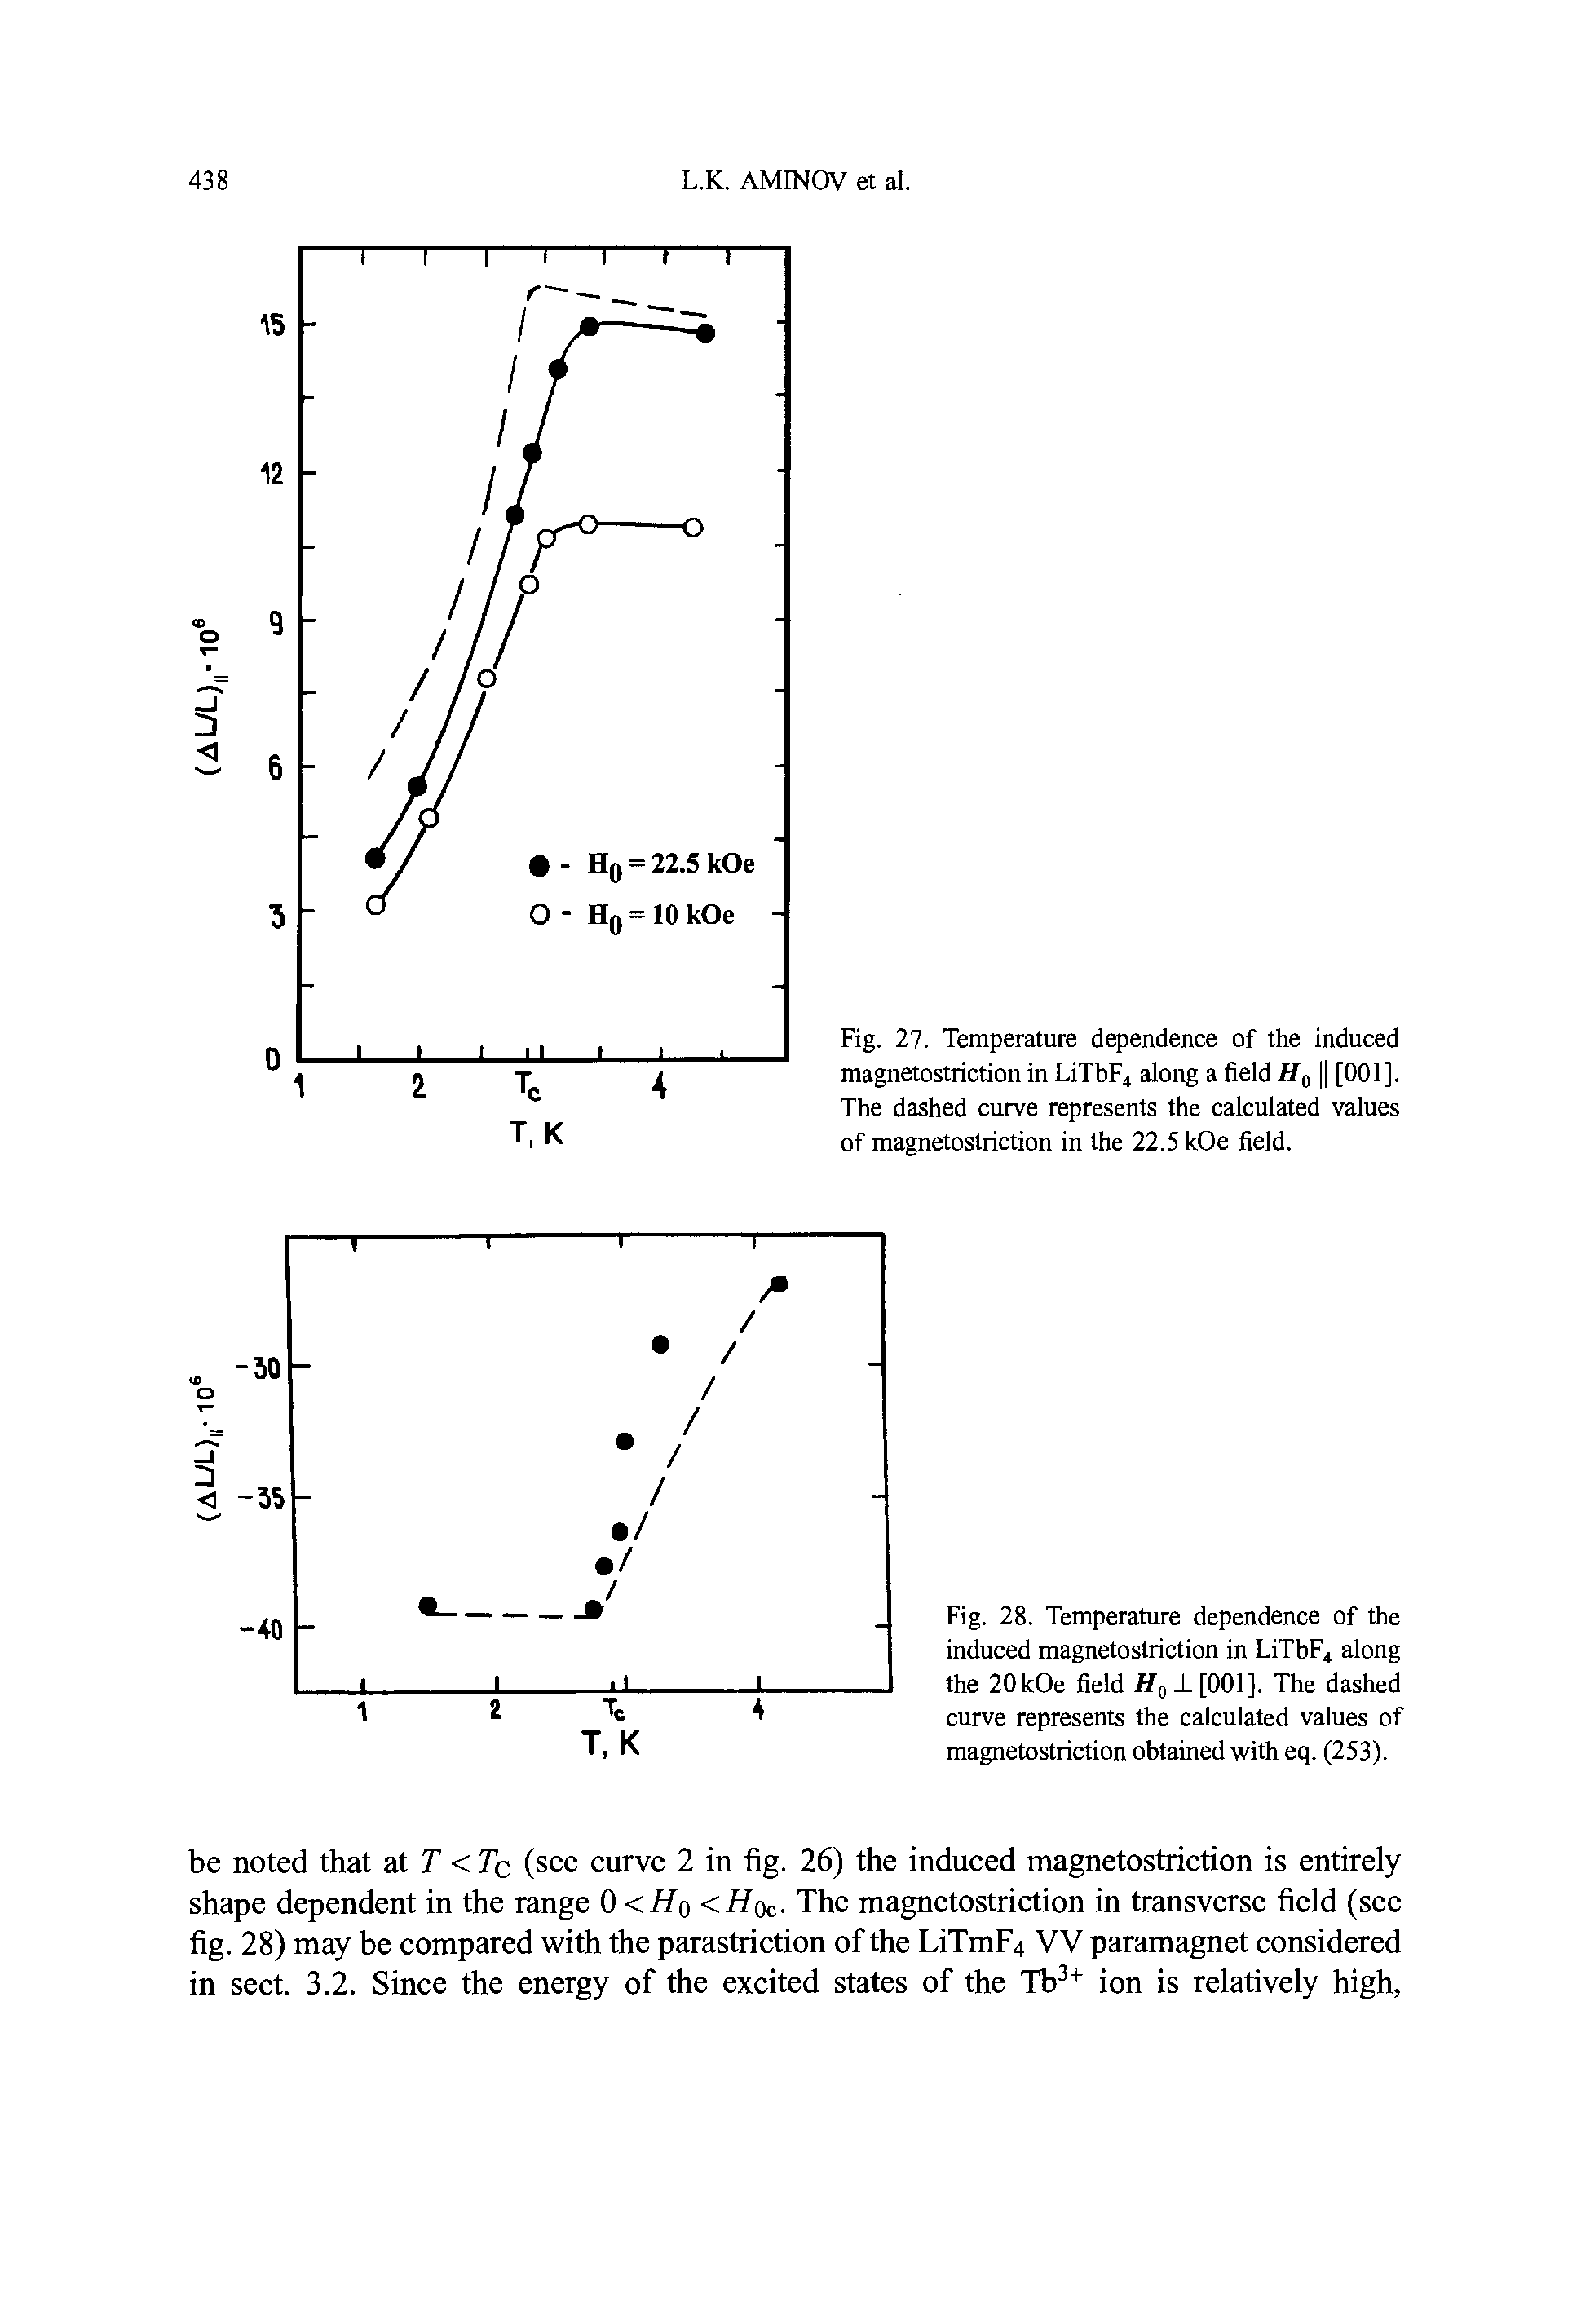 Fig. 28. Temperature dependence of the induced magnetostriction in LiTbp4 along the 20kOe field L [001]. The dashed curve represents the calculated values of magnetostriction obtained with eq. (253).